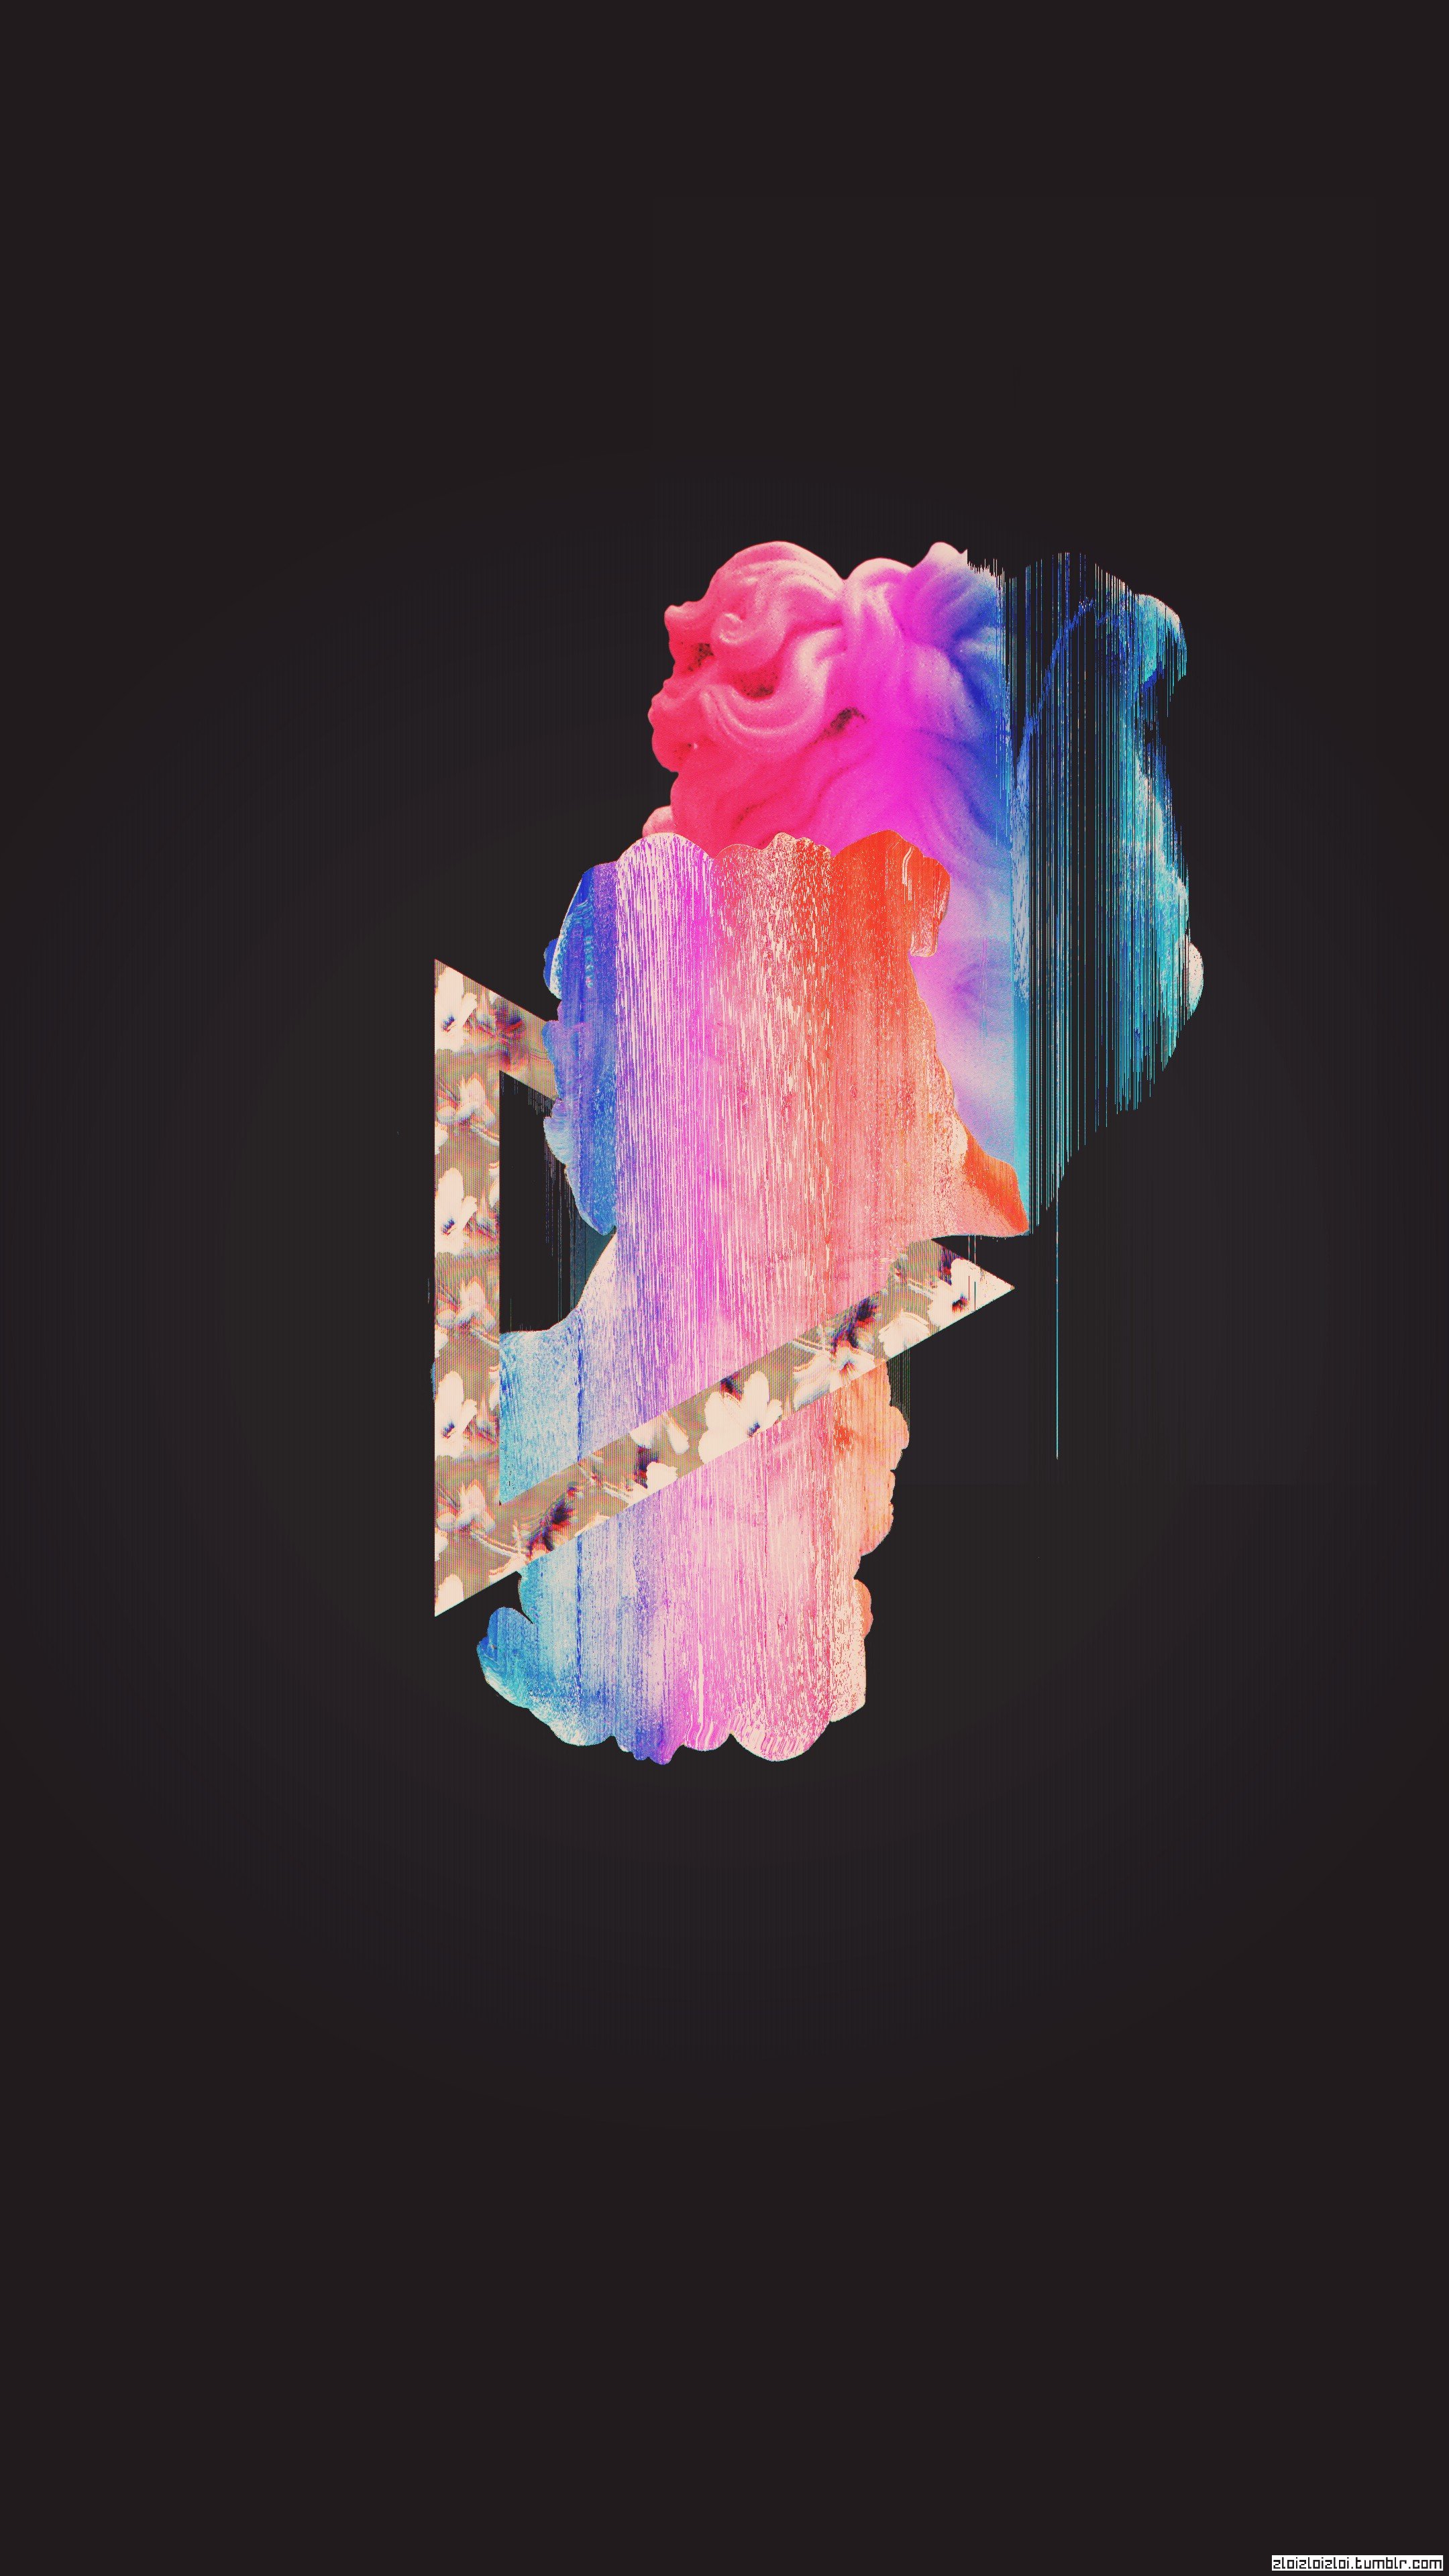 Glitch Phone Wallpapers